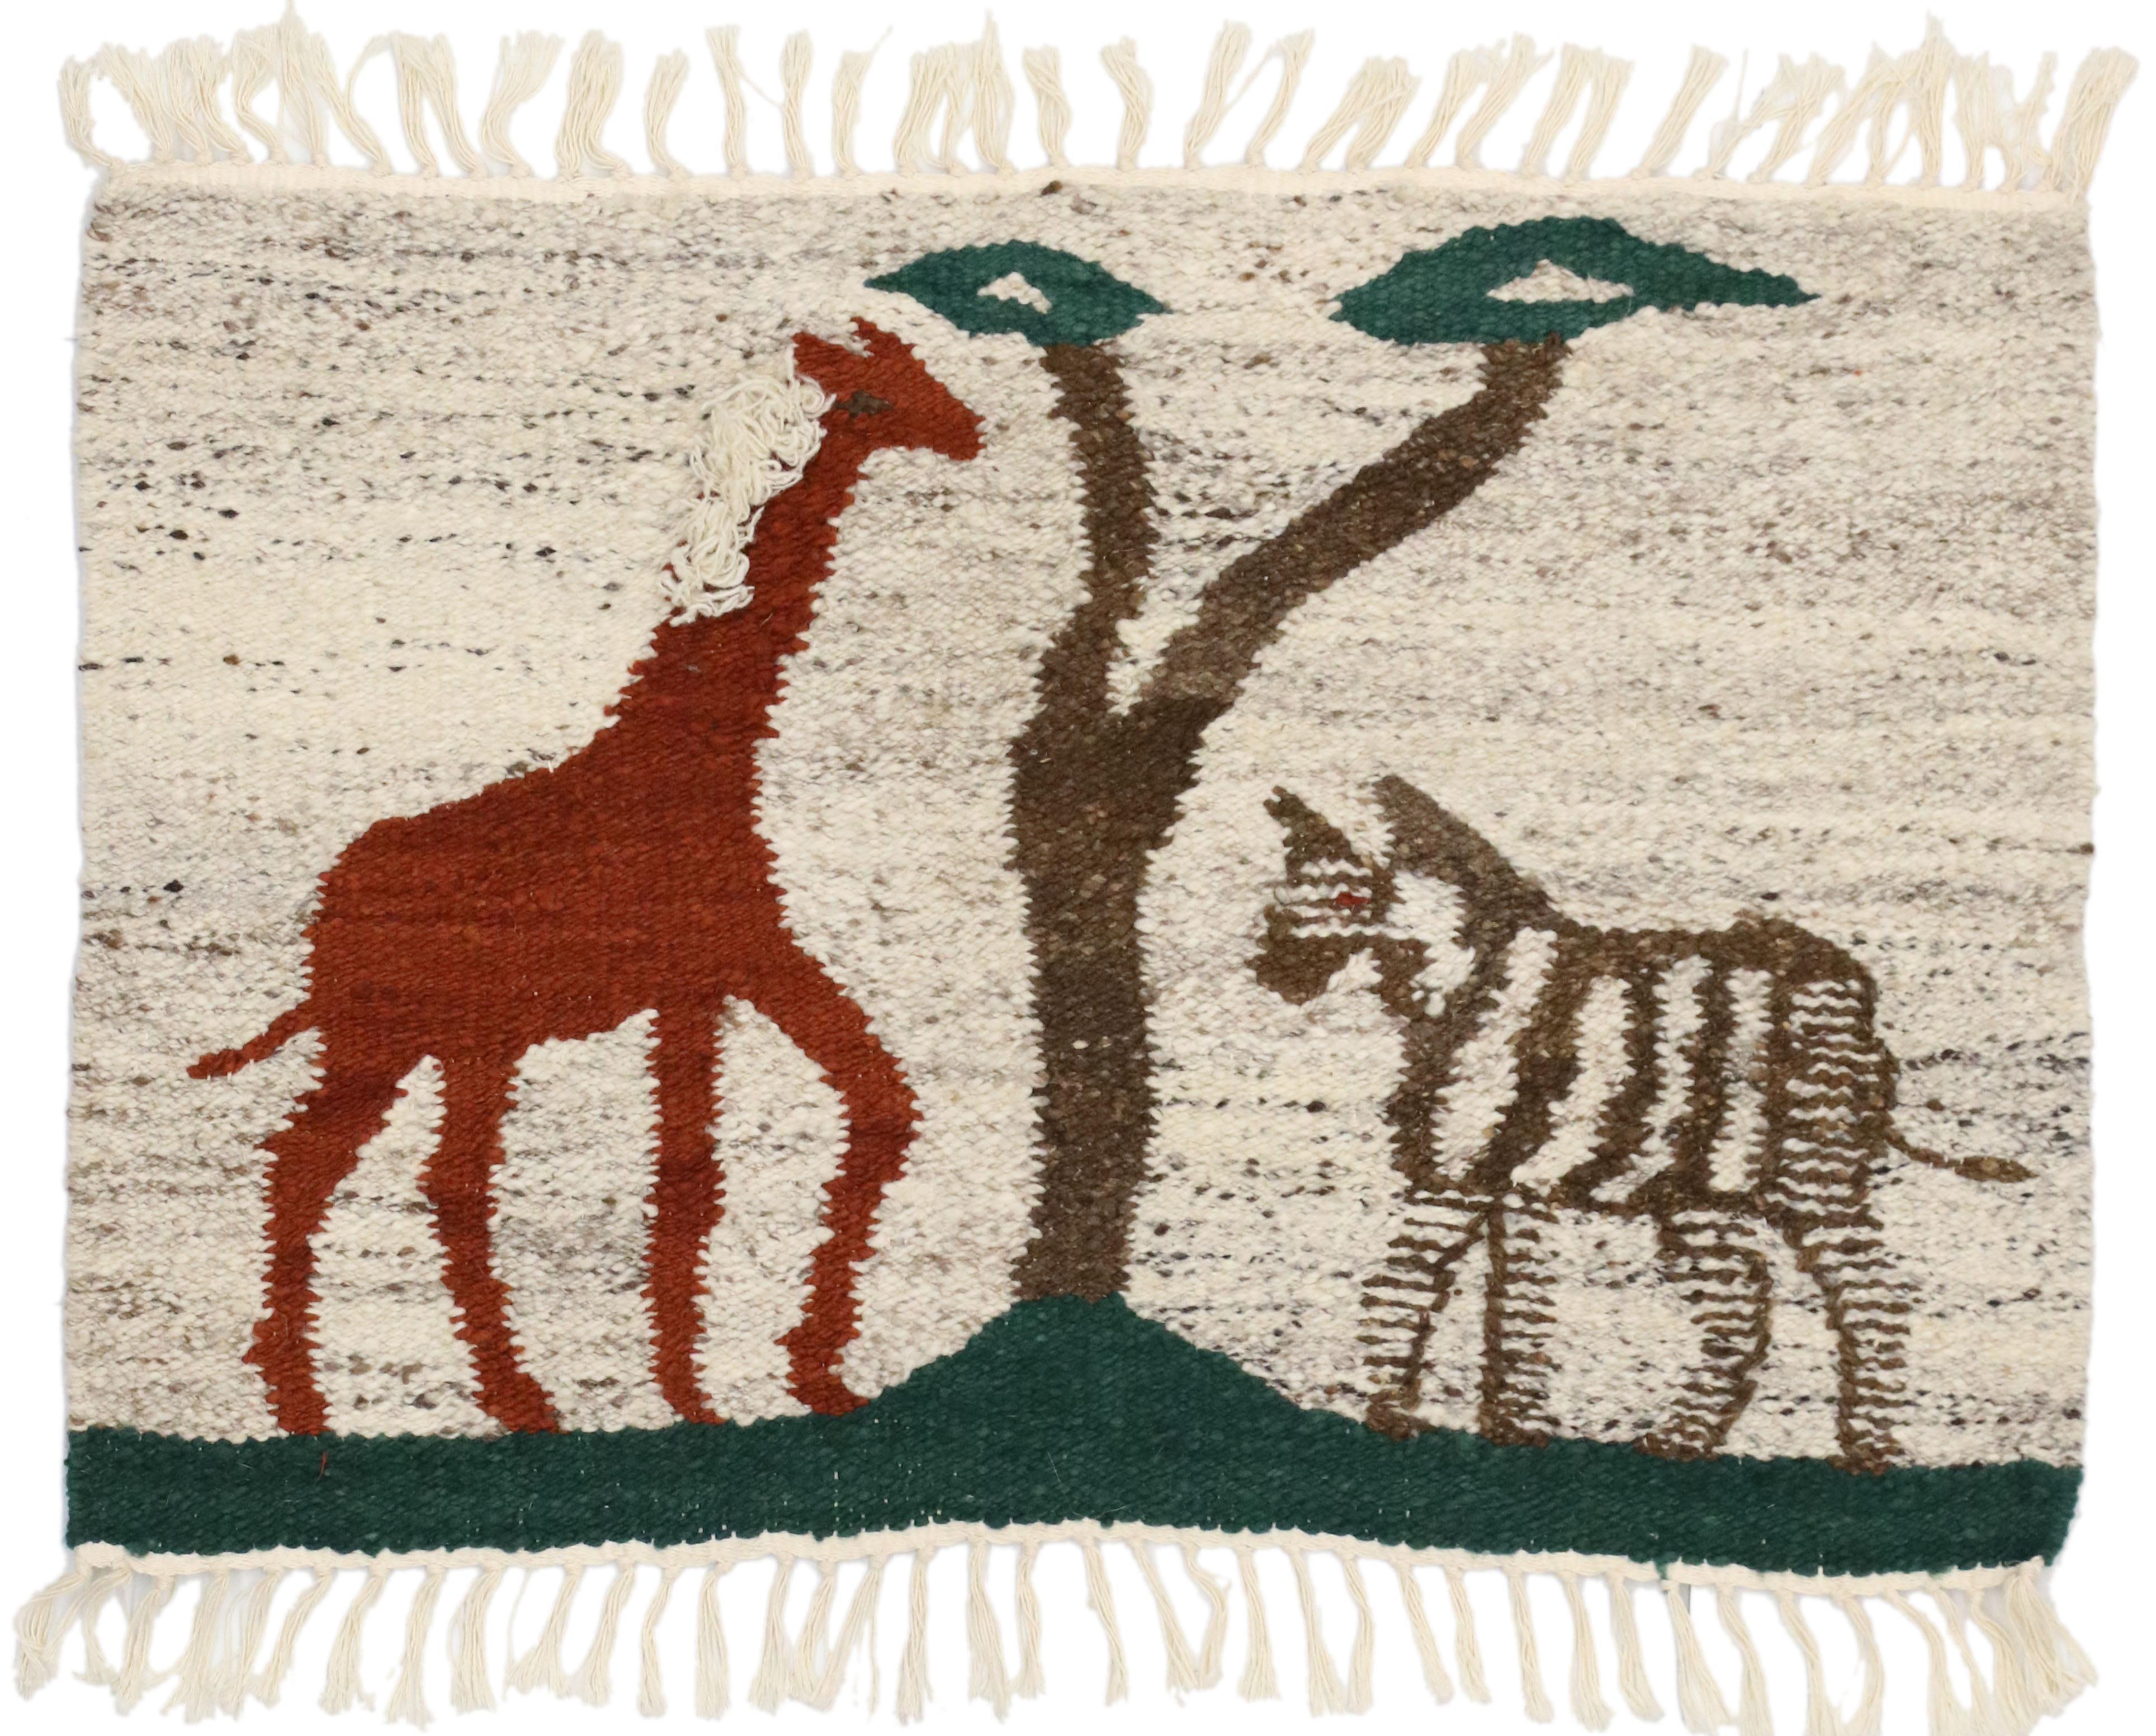 20th Century Vintage African Tapestry Wall Hanging with British Colonial Safari Style For Sale